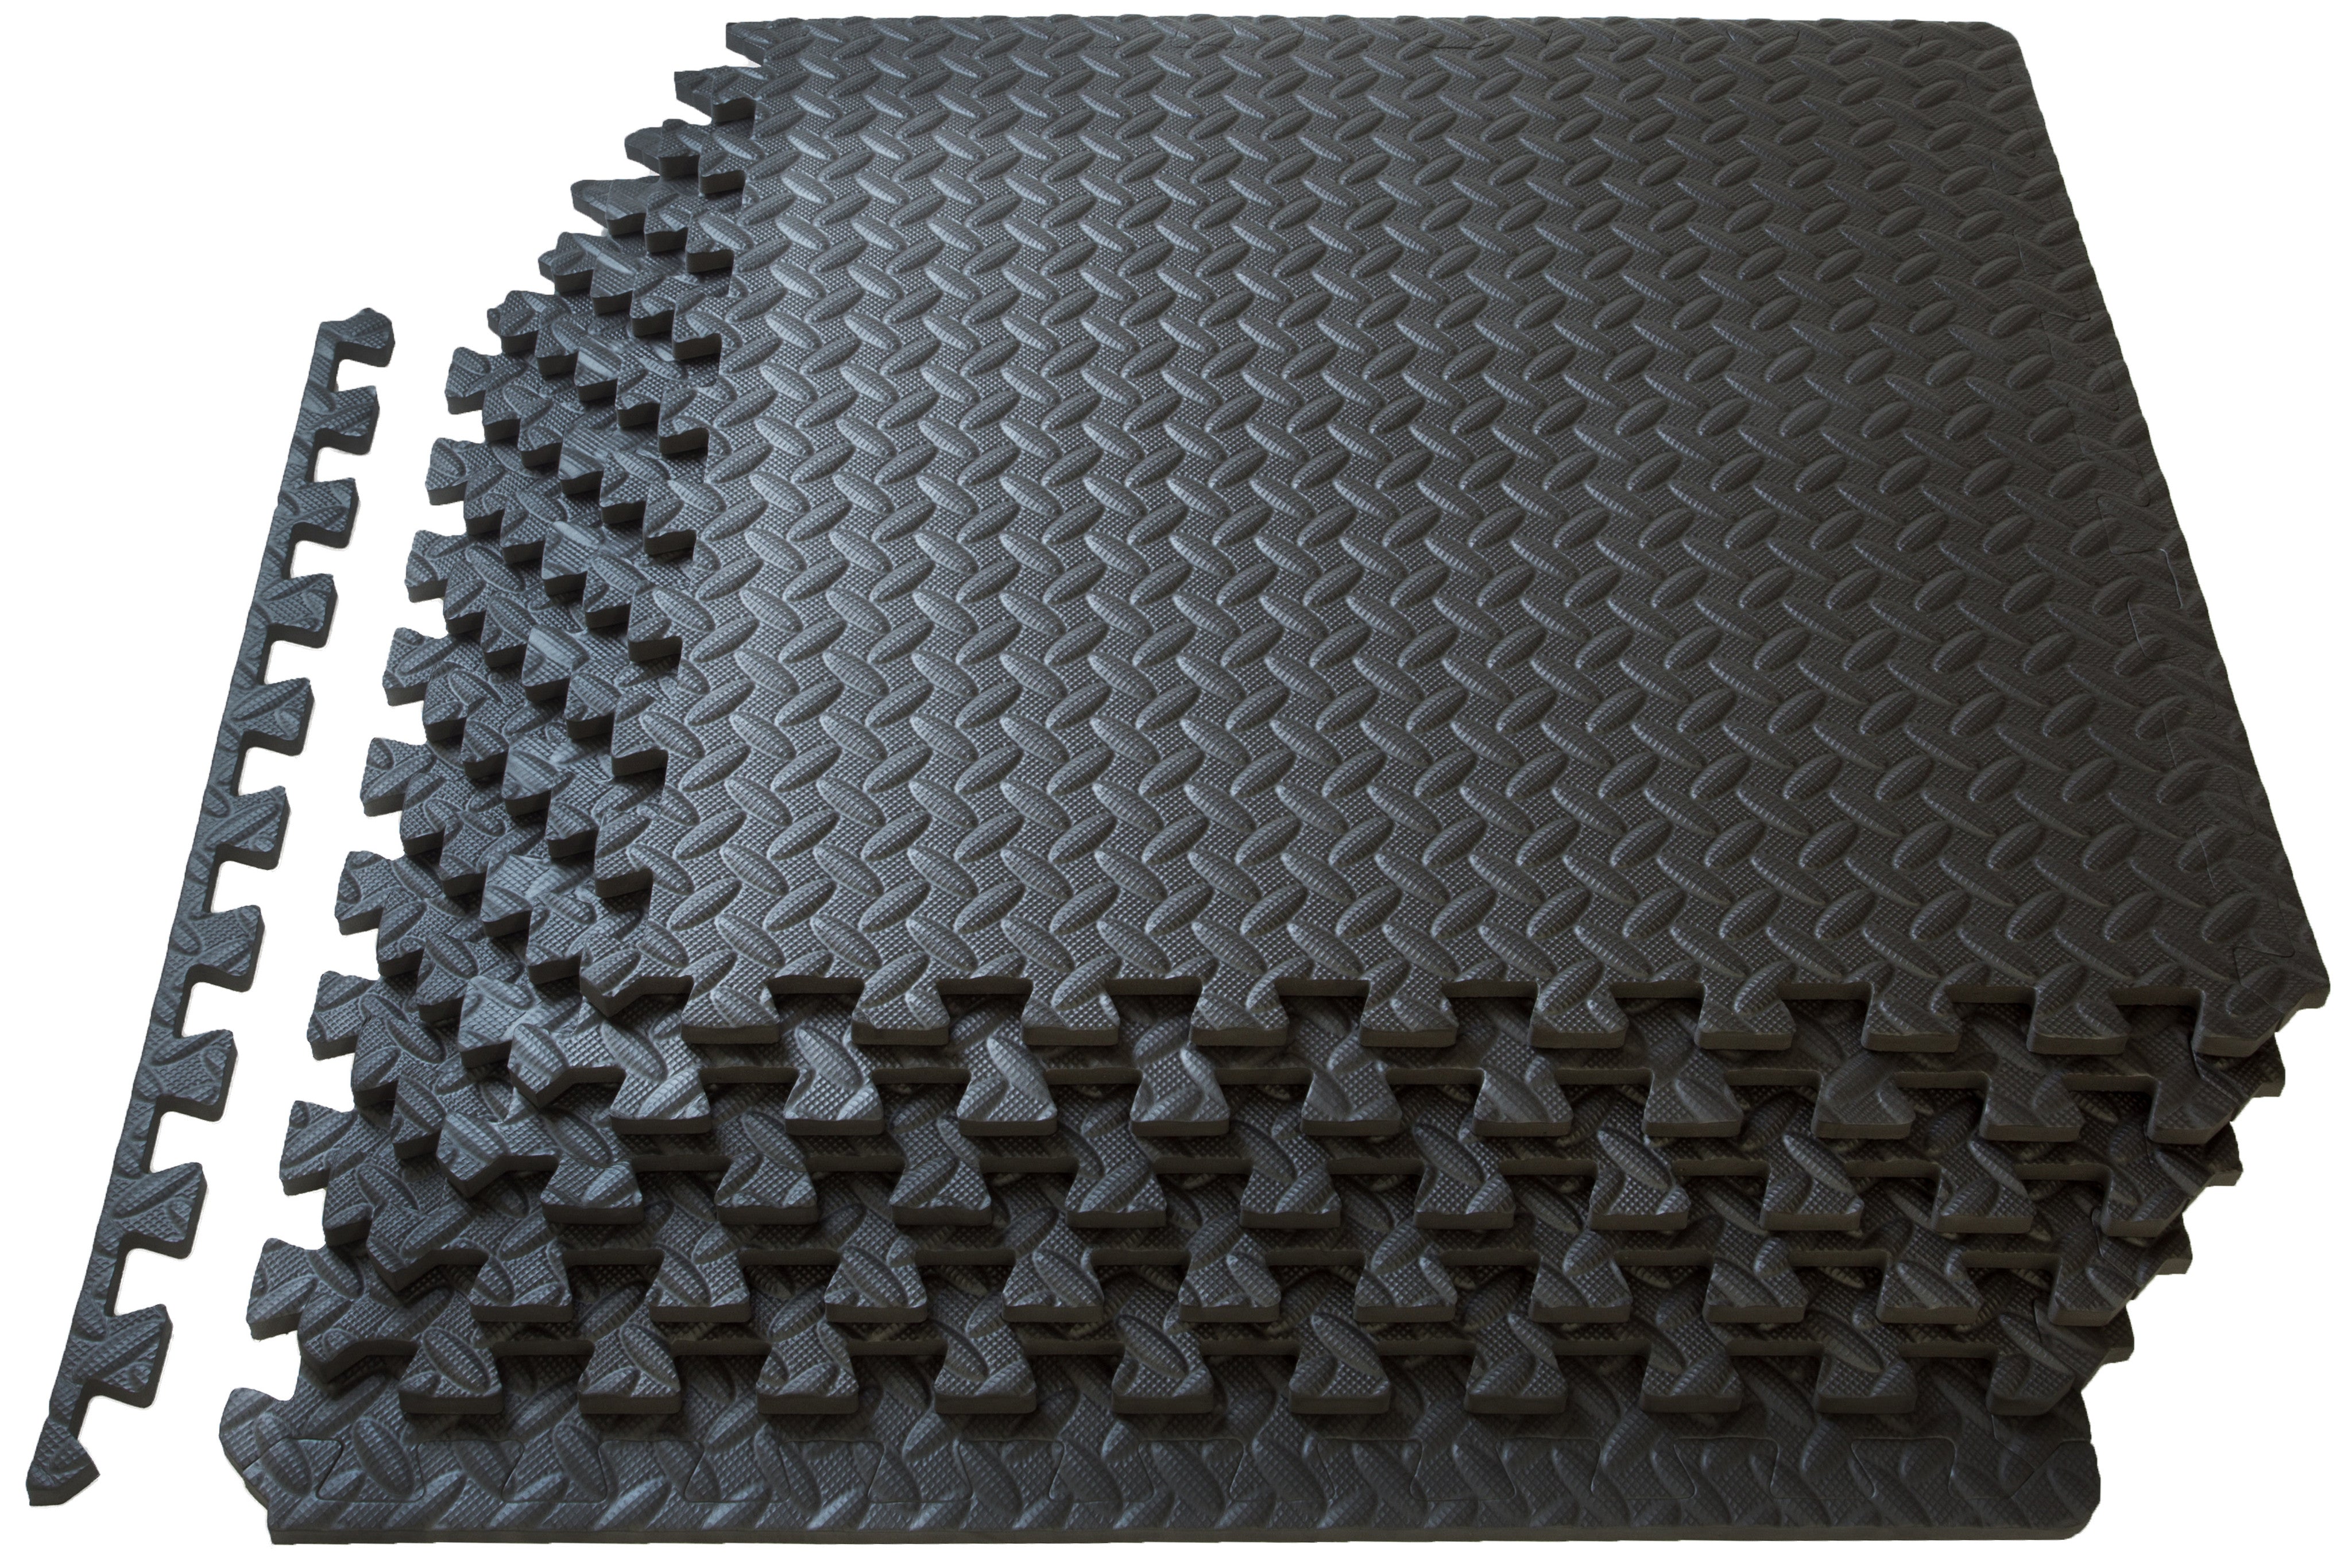 exercise mat for wood floor